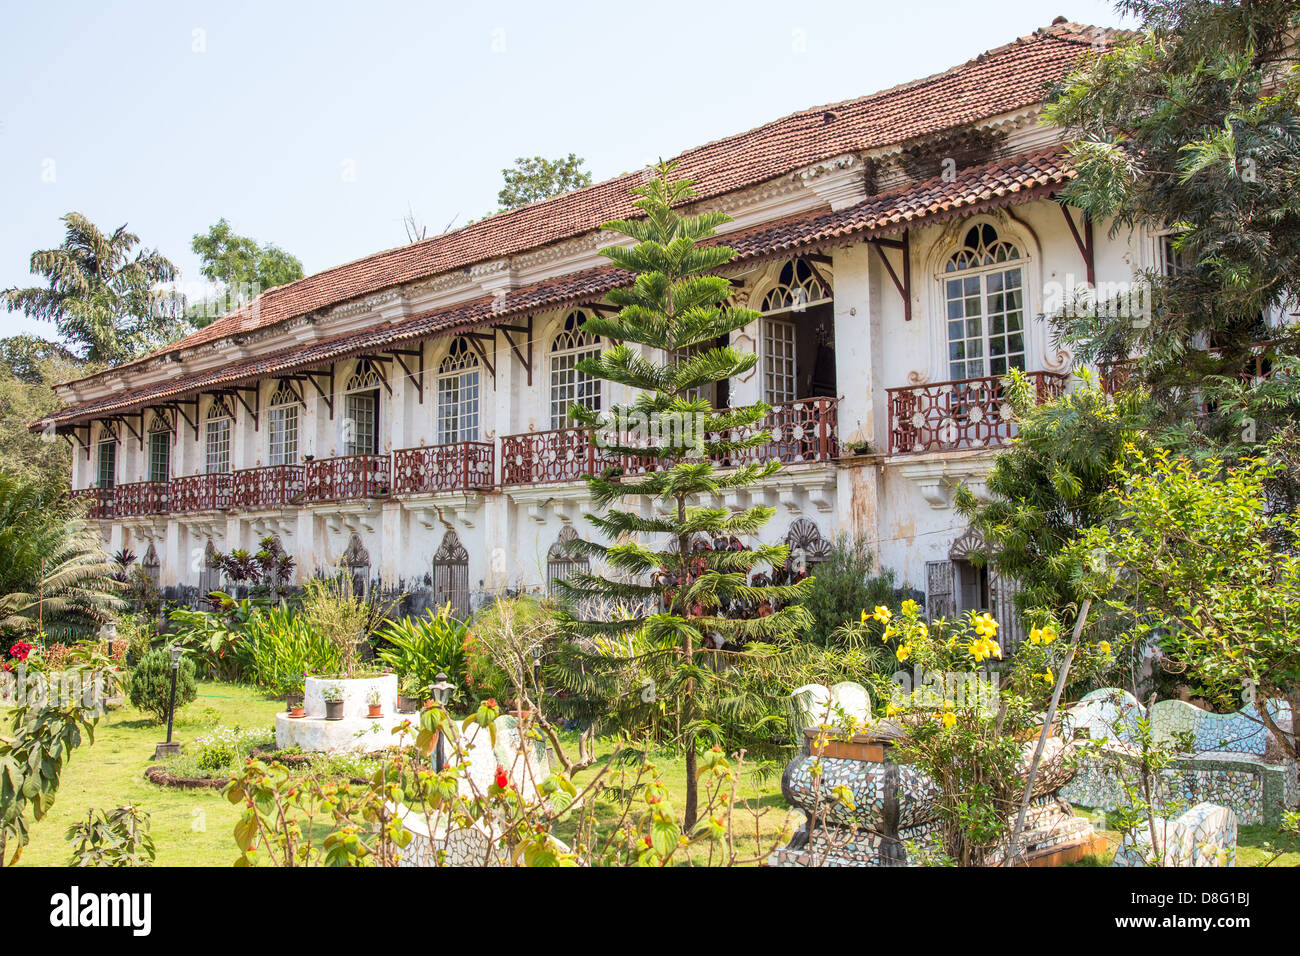 stock - and Goa Alamy mansion hi-res colonial india images photography